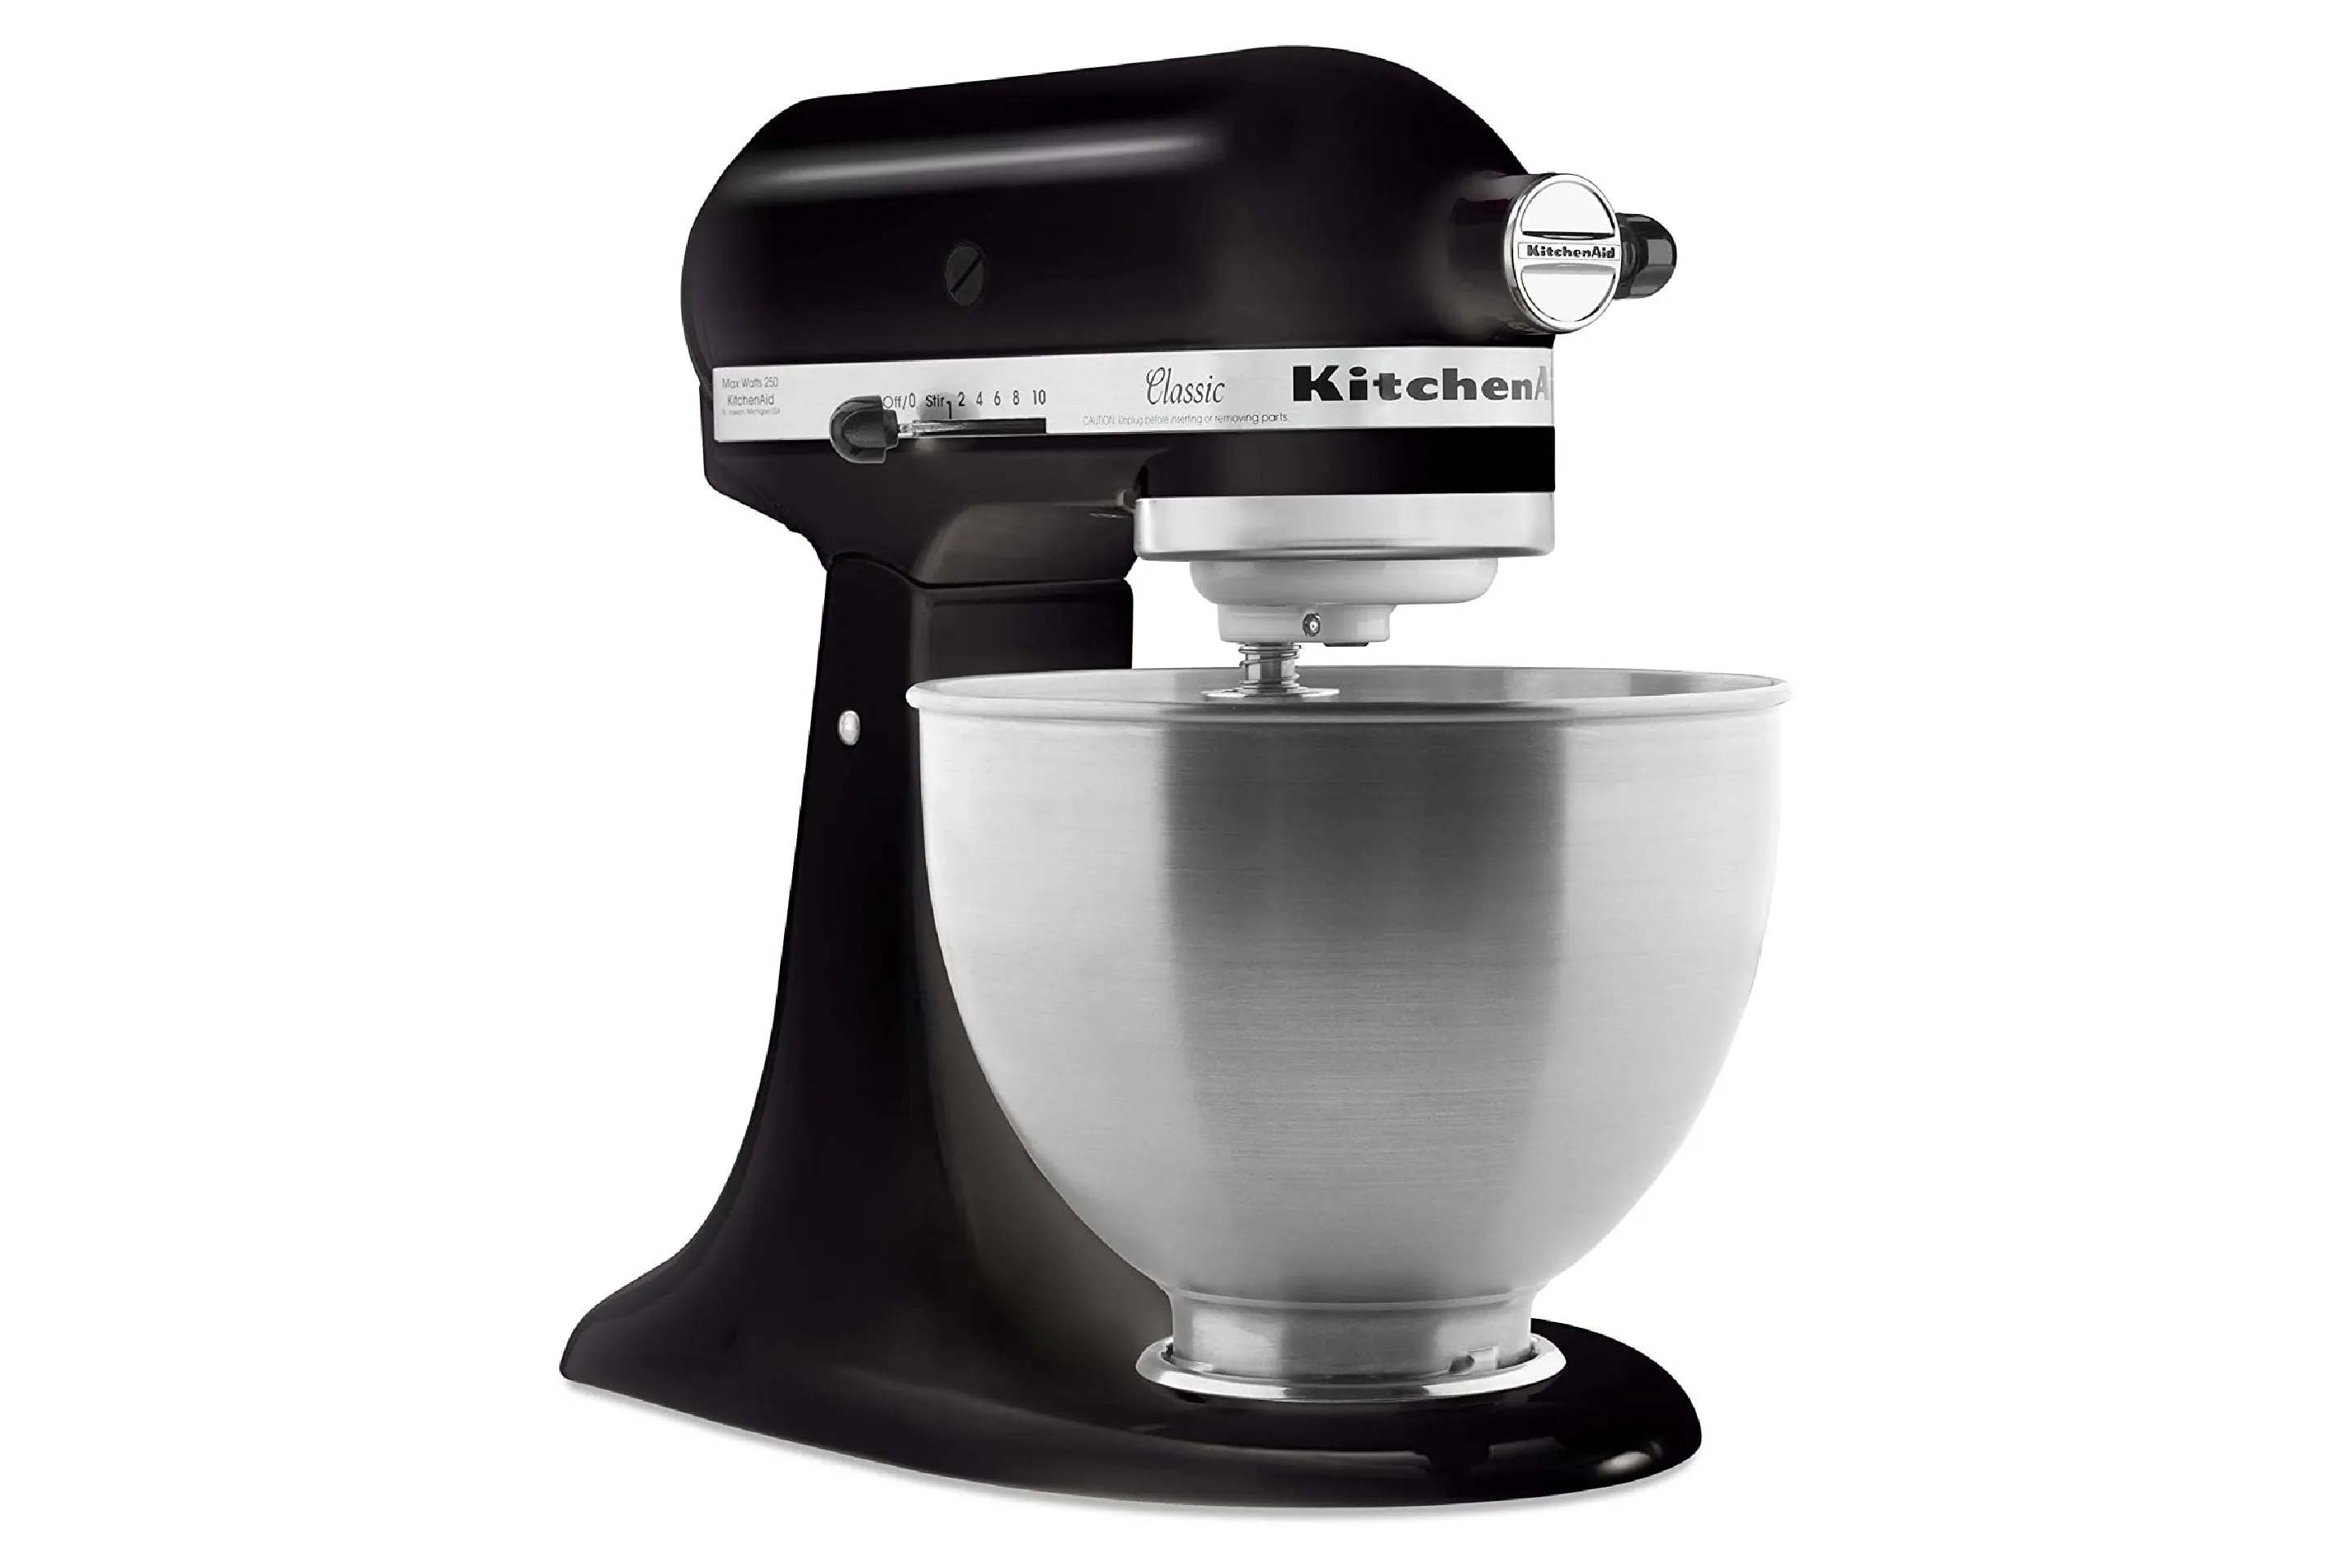 KitchenAid 4.5Q Stand Mixer Stainless Steel Whip/Whisk